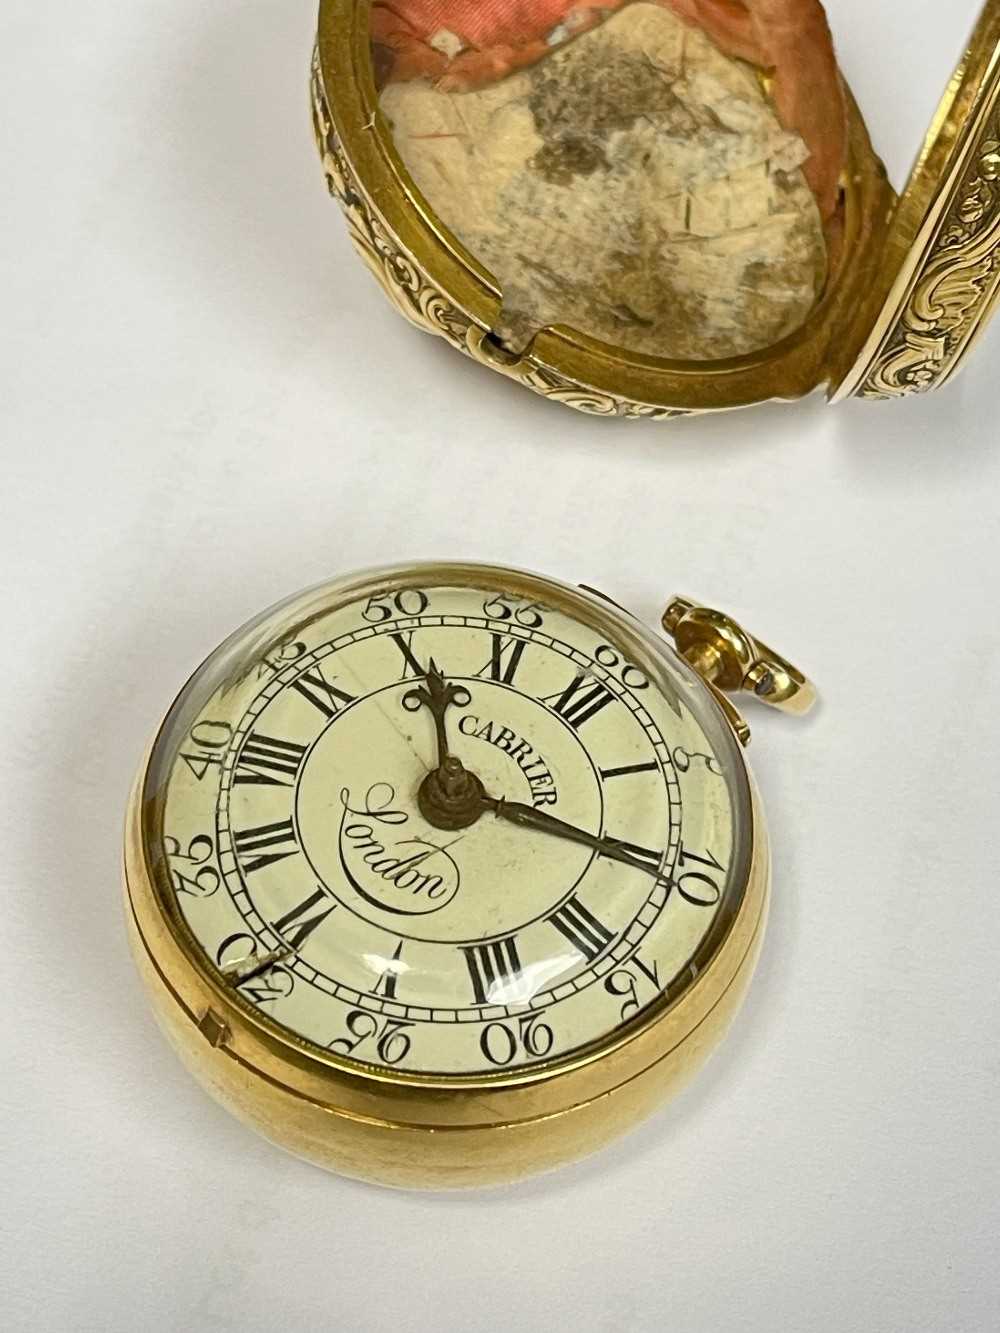 MID-18TH C. GOLD PAIR CASED POCKET WATCH, Charles Cabrier, London 1750, with white enamel dial, - Image 7 of 12